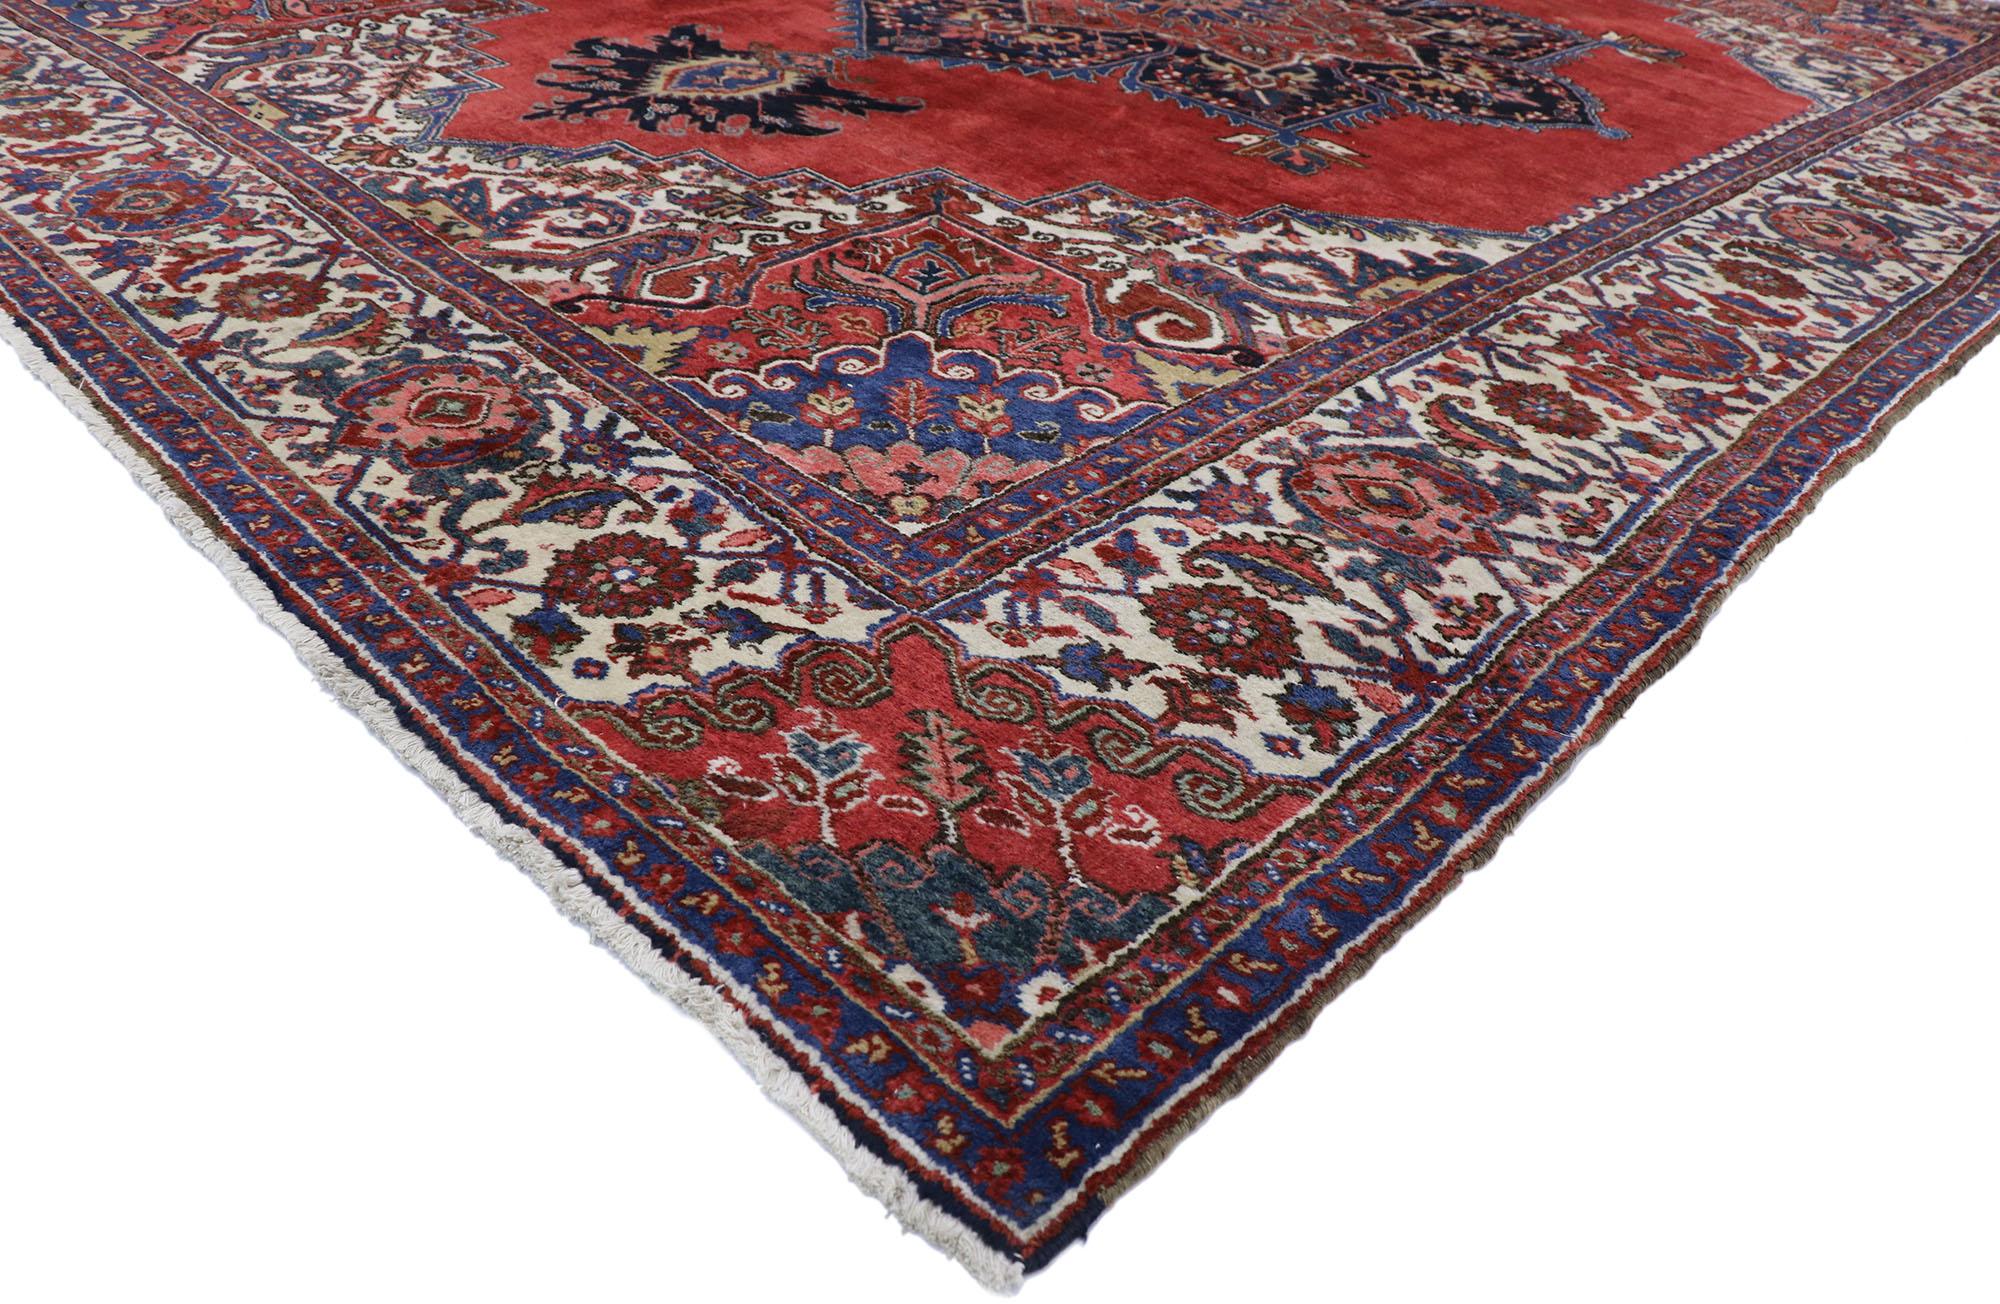 77628, antique Persian Heriz rug with Regal Jacobean style. With its striking appeal and saturated red color palette, this hand-knotted wool antique Persian Heriz rug appears like a sumptuous Italian velvet, recalling the rich and luxurious design